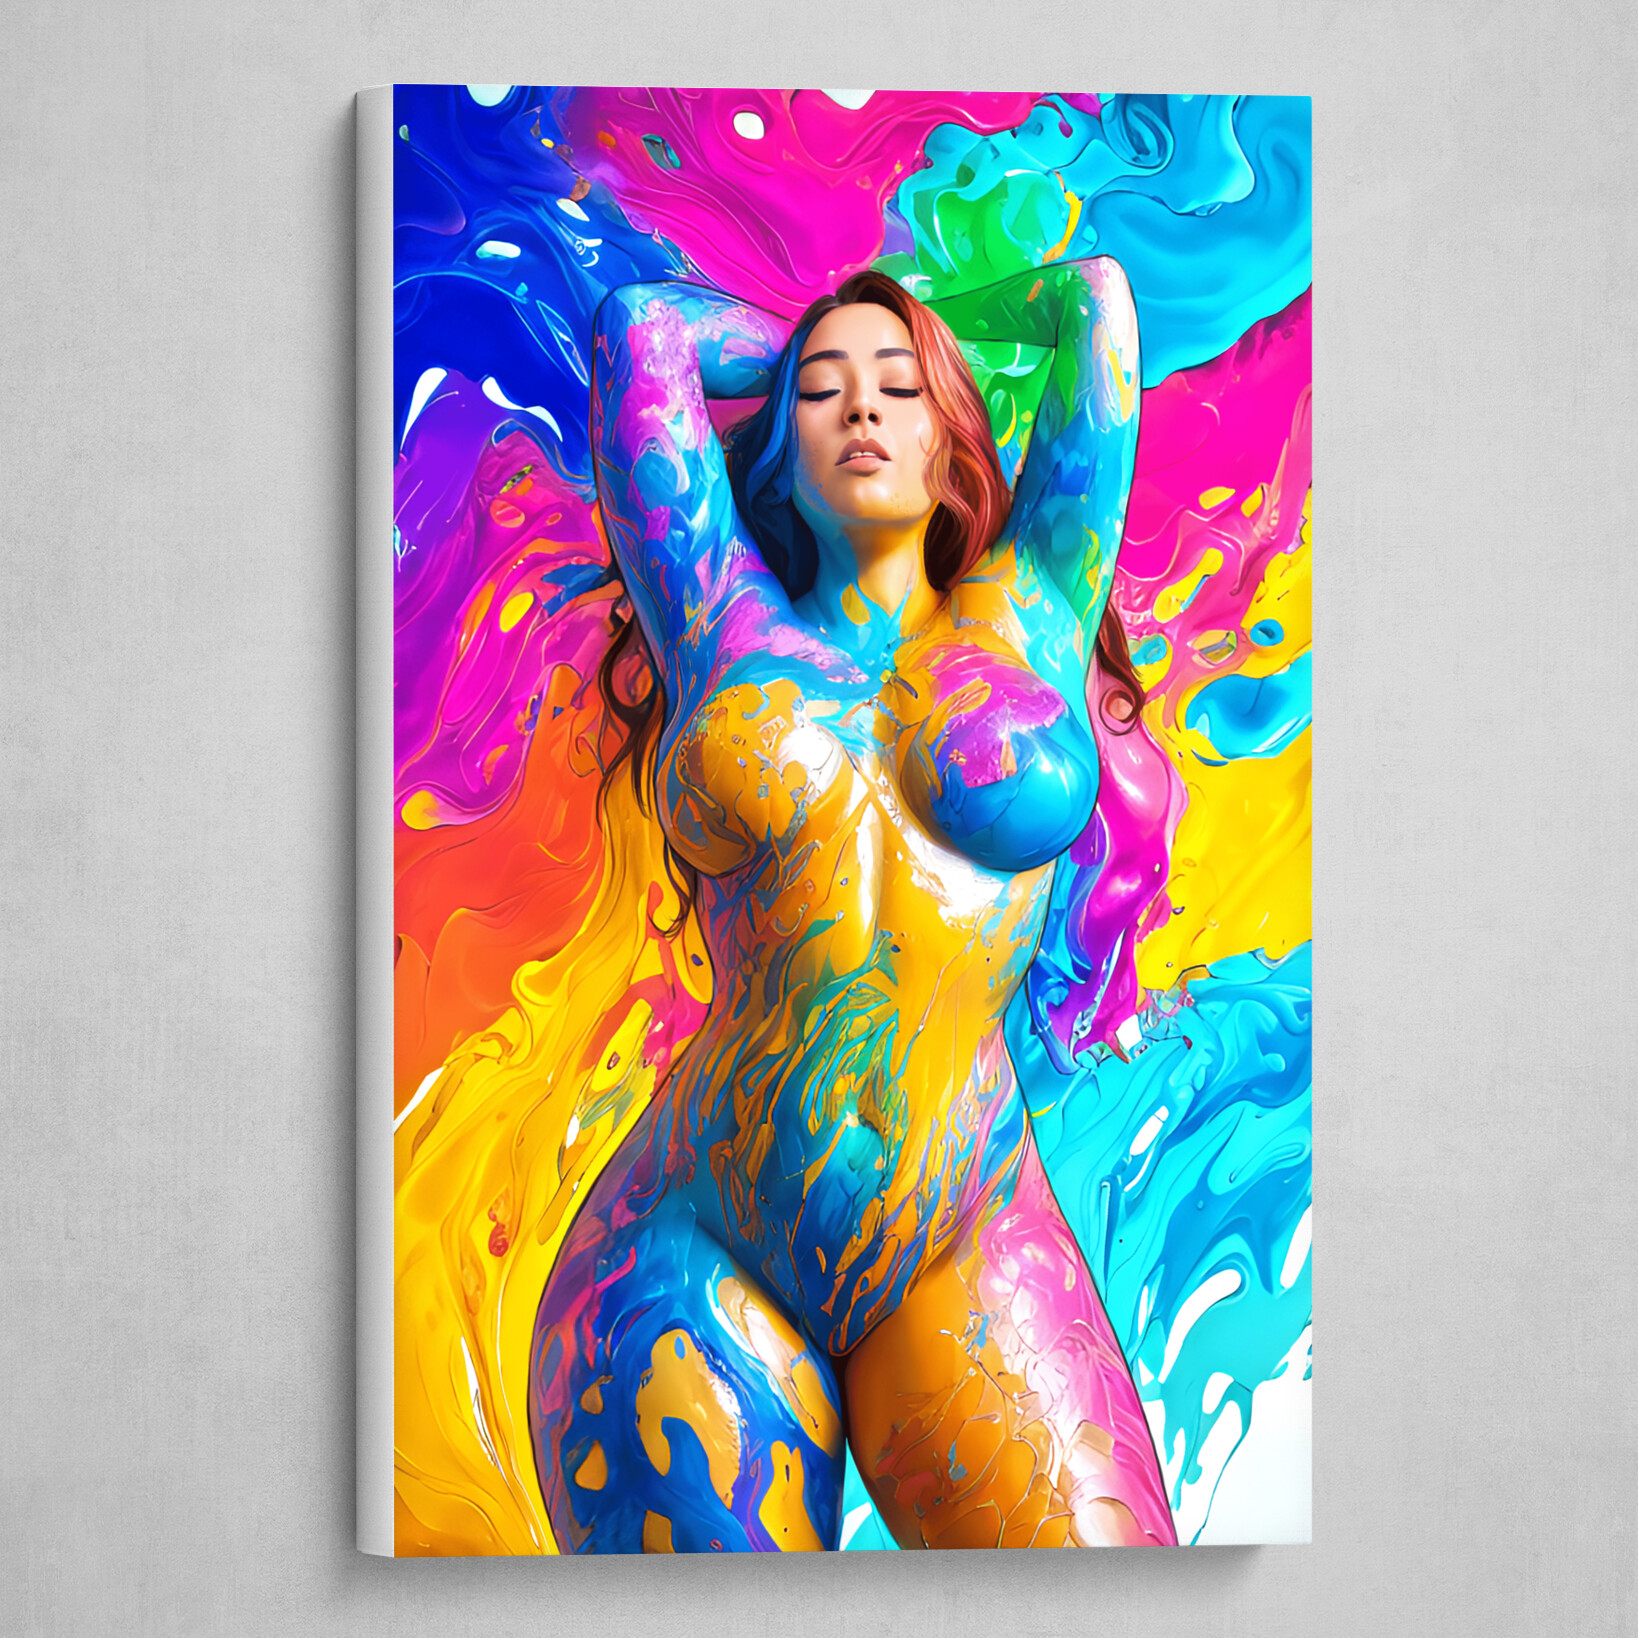 Hyper Rainbow - Colorful Abstract body art 5